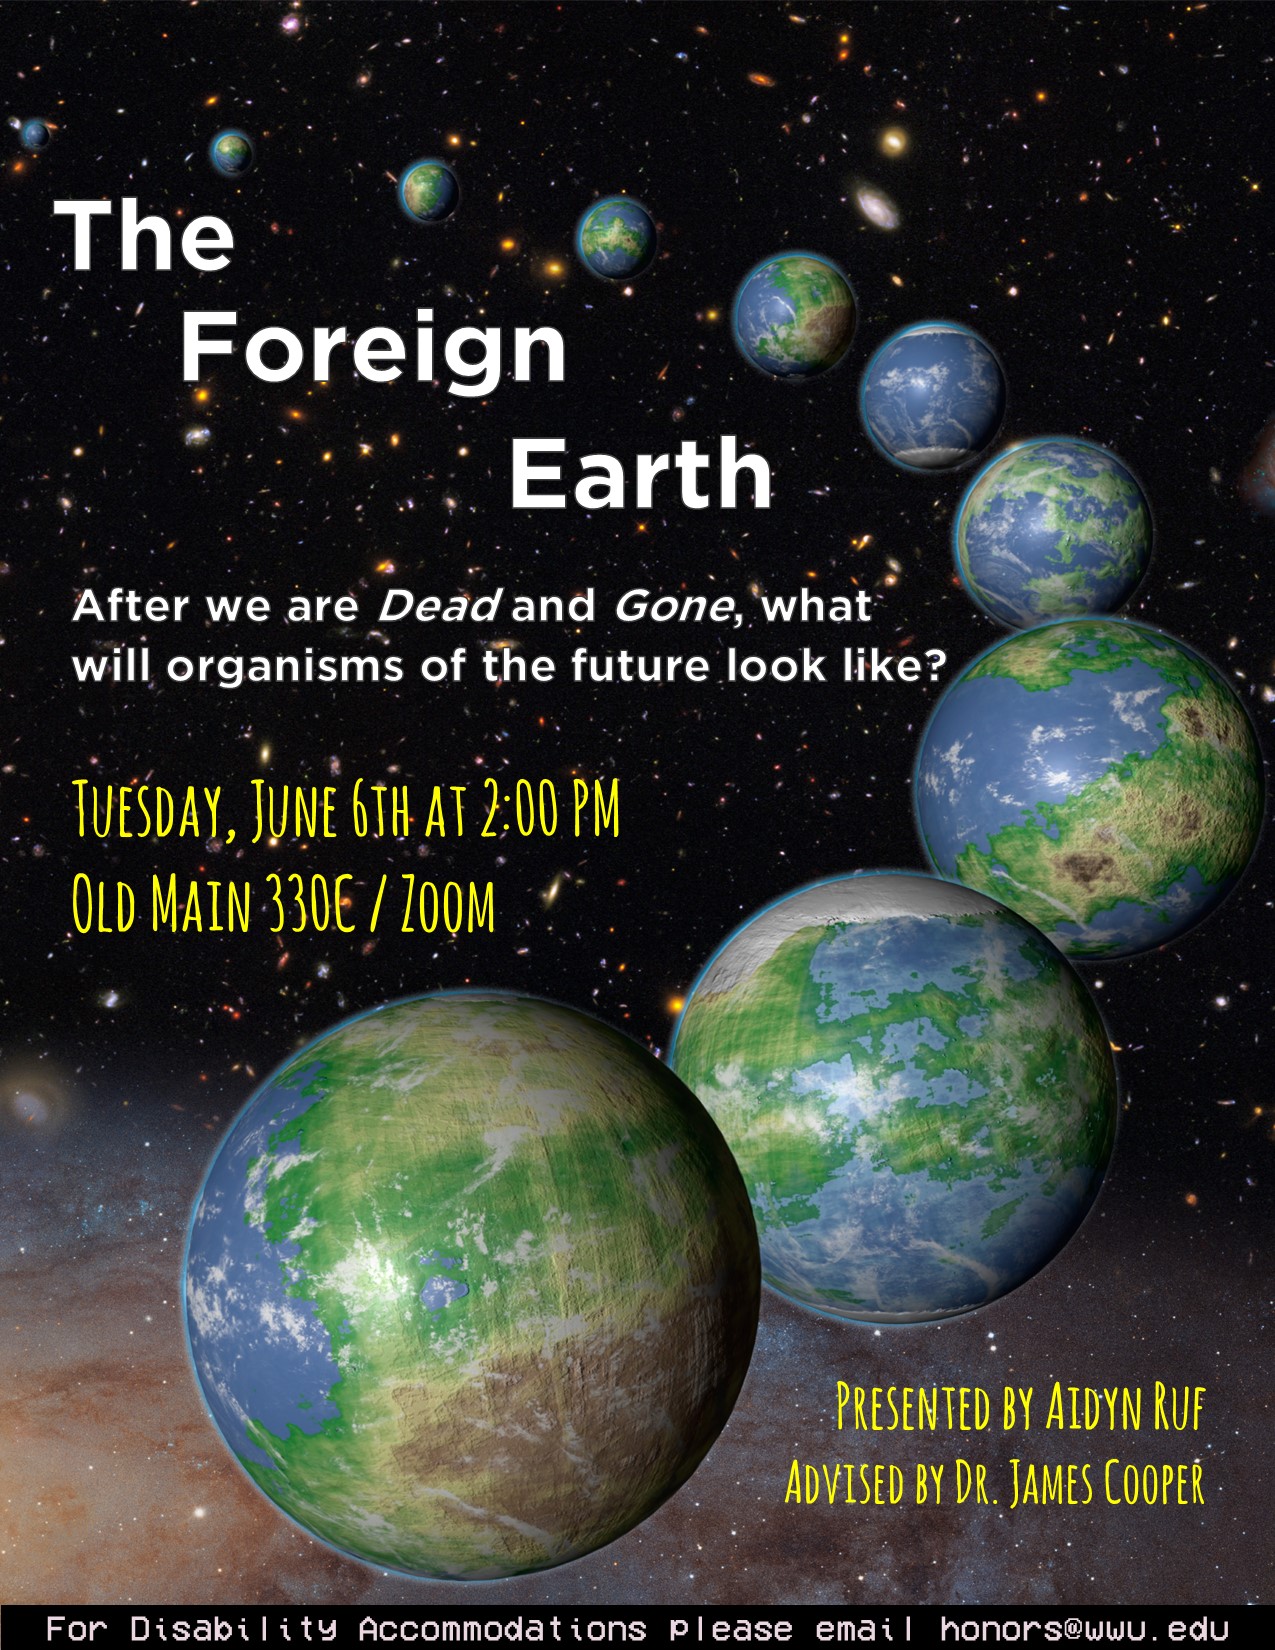 A poster set in space with 9 versions of Earth getting closer and bigger. Text reads: "The Foreign Earth. After we are Dead and Gone, what will organisms of the future look like? Tuesday, June 6th at 2:00 pm. Old Main 330C/Zoom. Presented by Aidyn Ruf, Advised by Dr. James Cooper. For disability accommodations please email honors@wwu.edu."